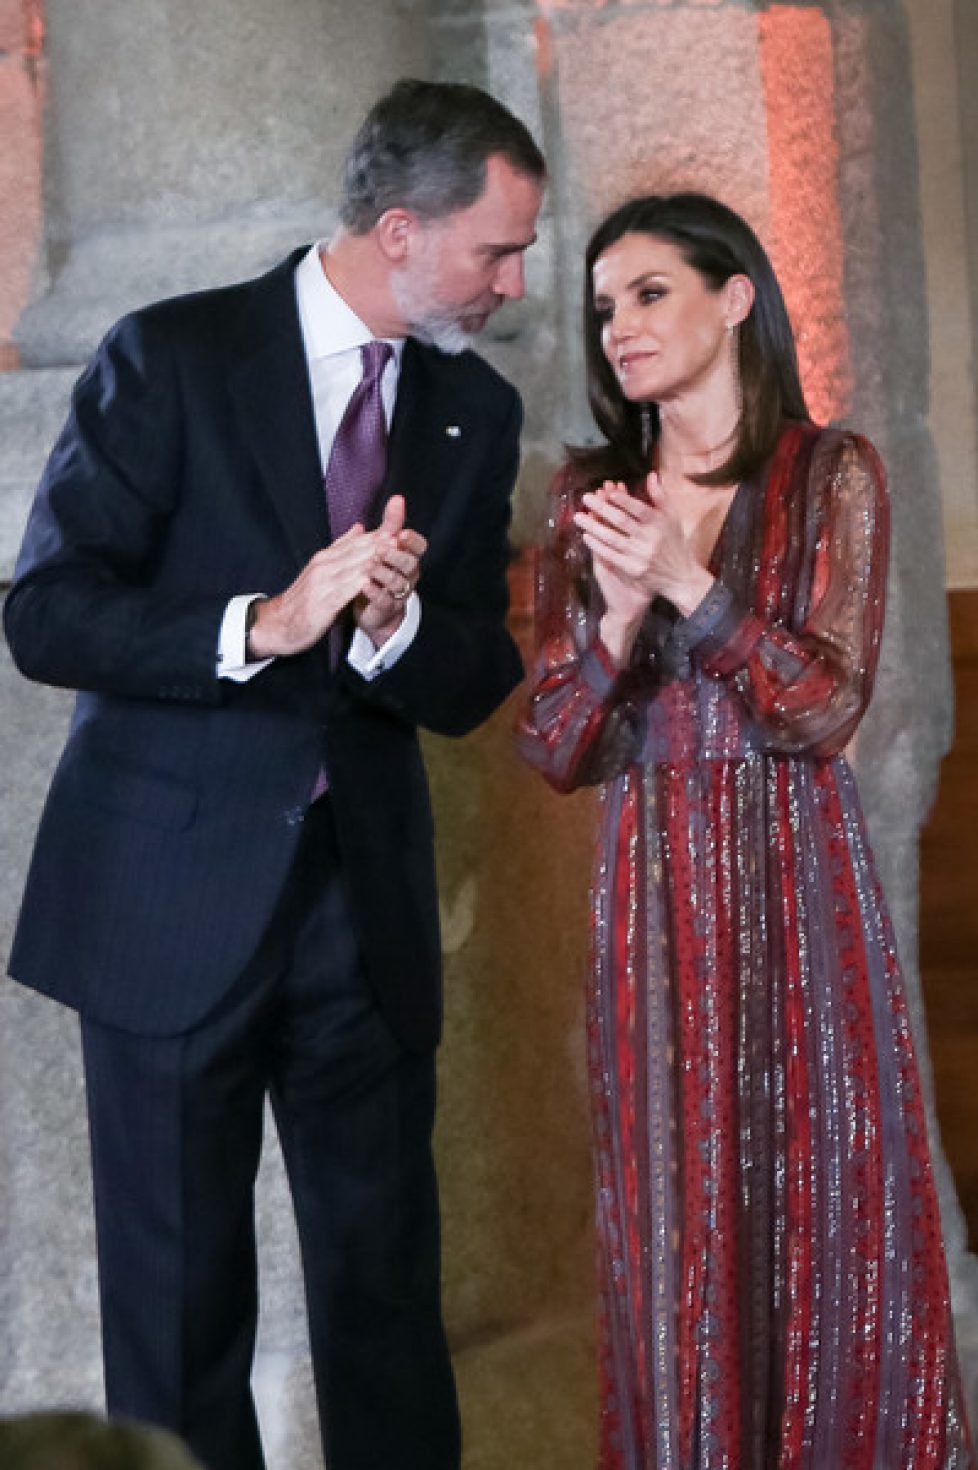 Spanish+Royals+Attend+National+Culture+Awards+geE4hPo7HGGl